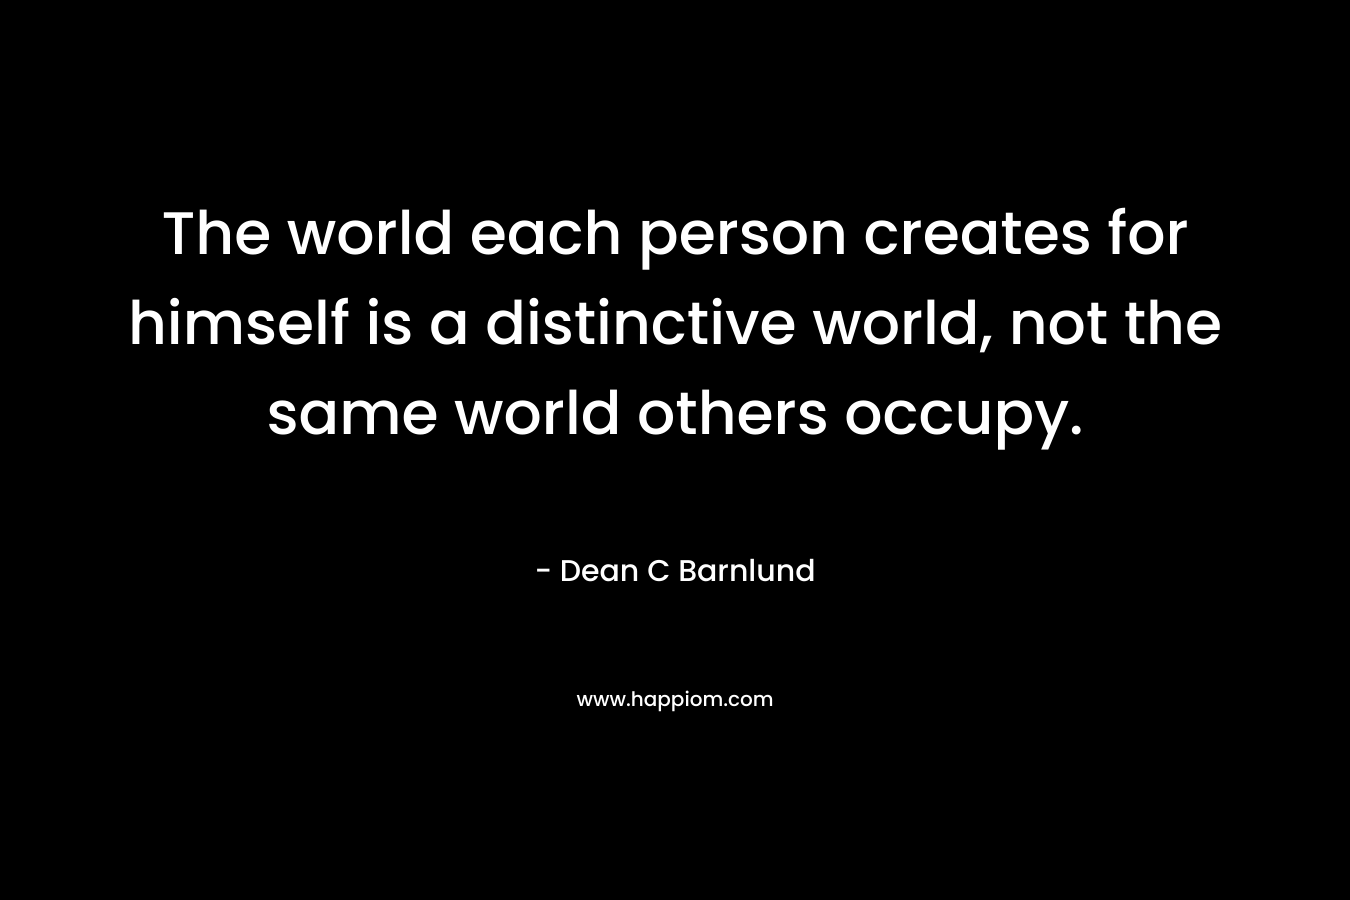 The world each person creates for himself is a distinctive world, not the same world others occupy. – Dean C Barnlund